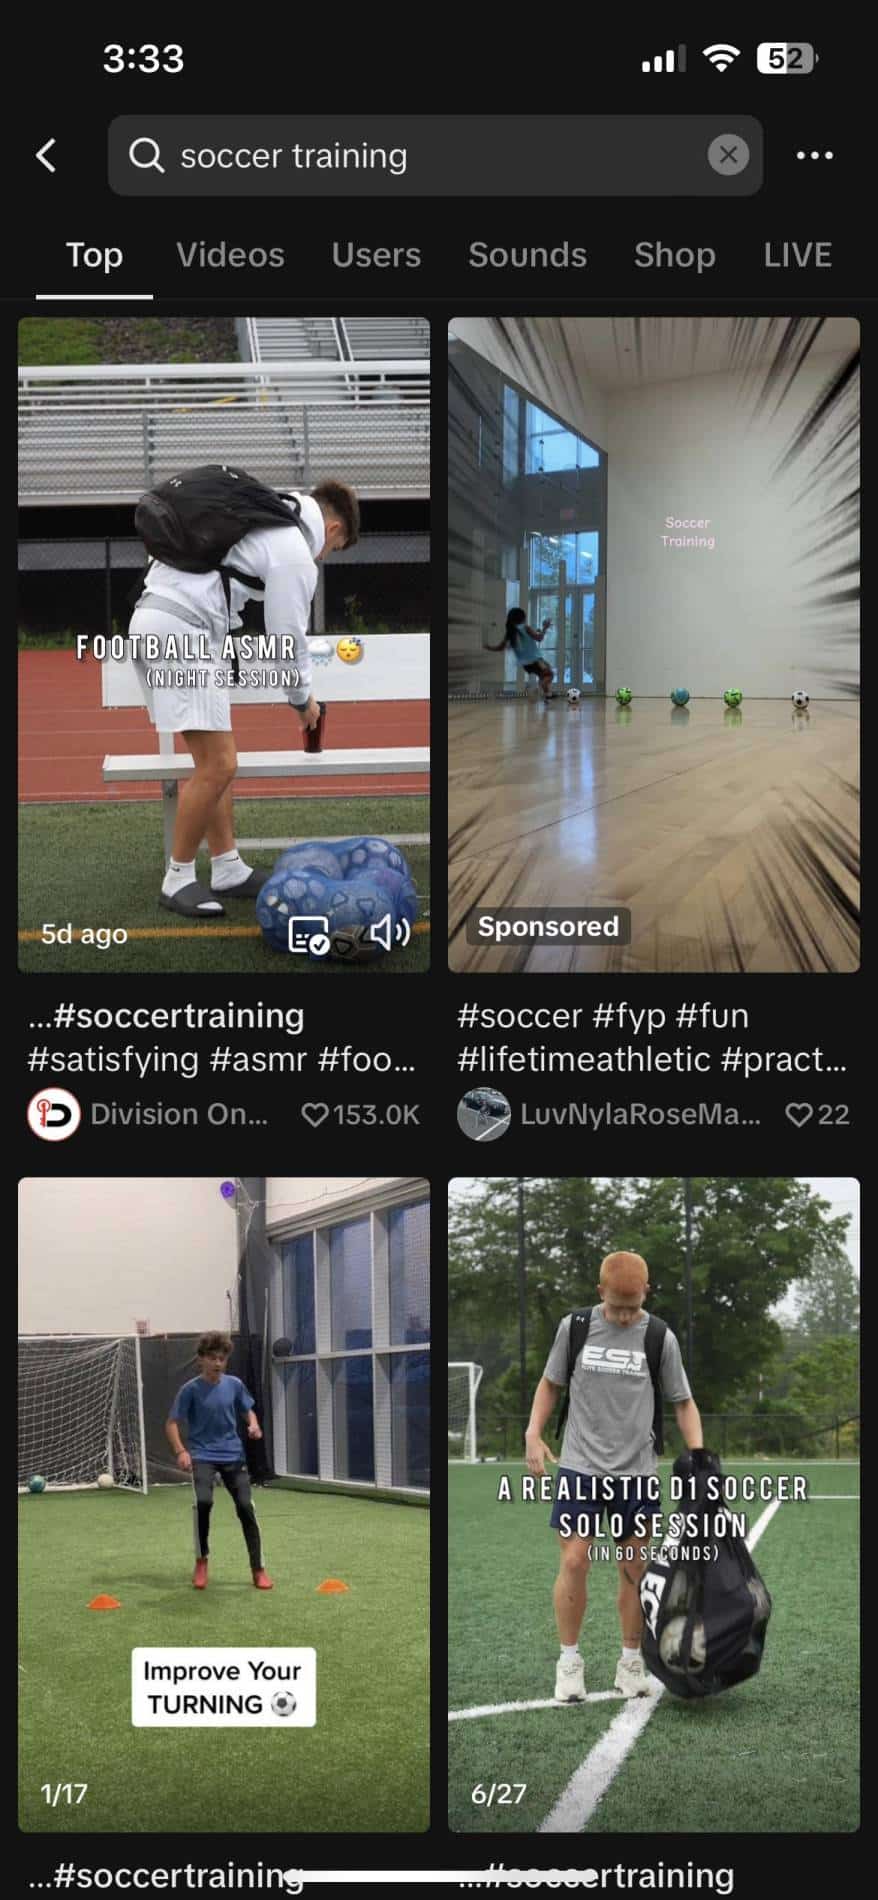 Search results page for "soccer training" in the TikTok app.